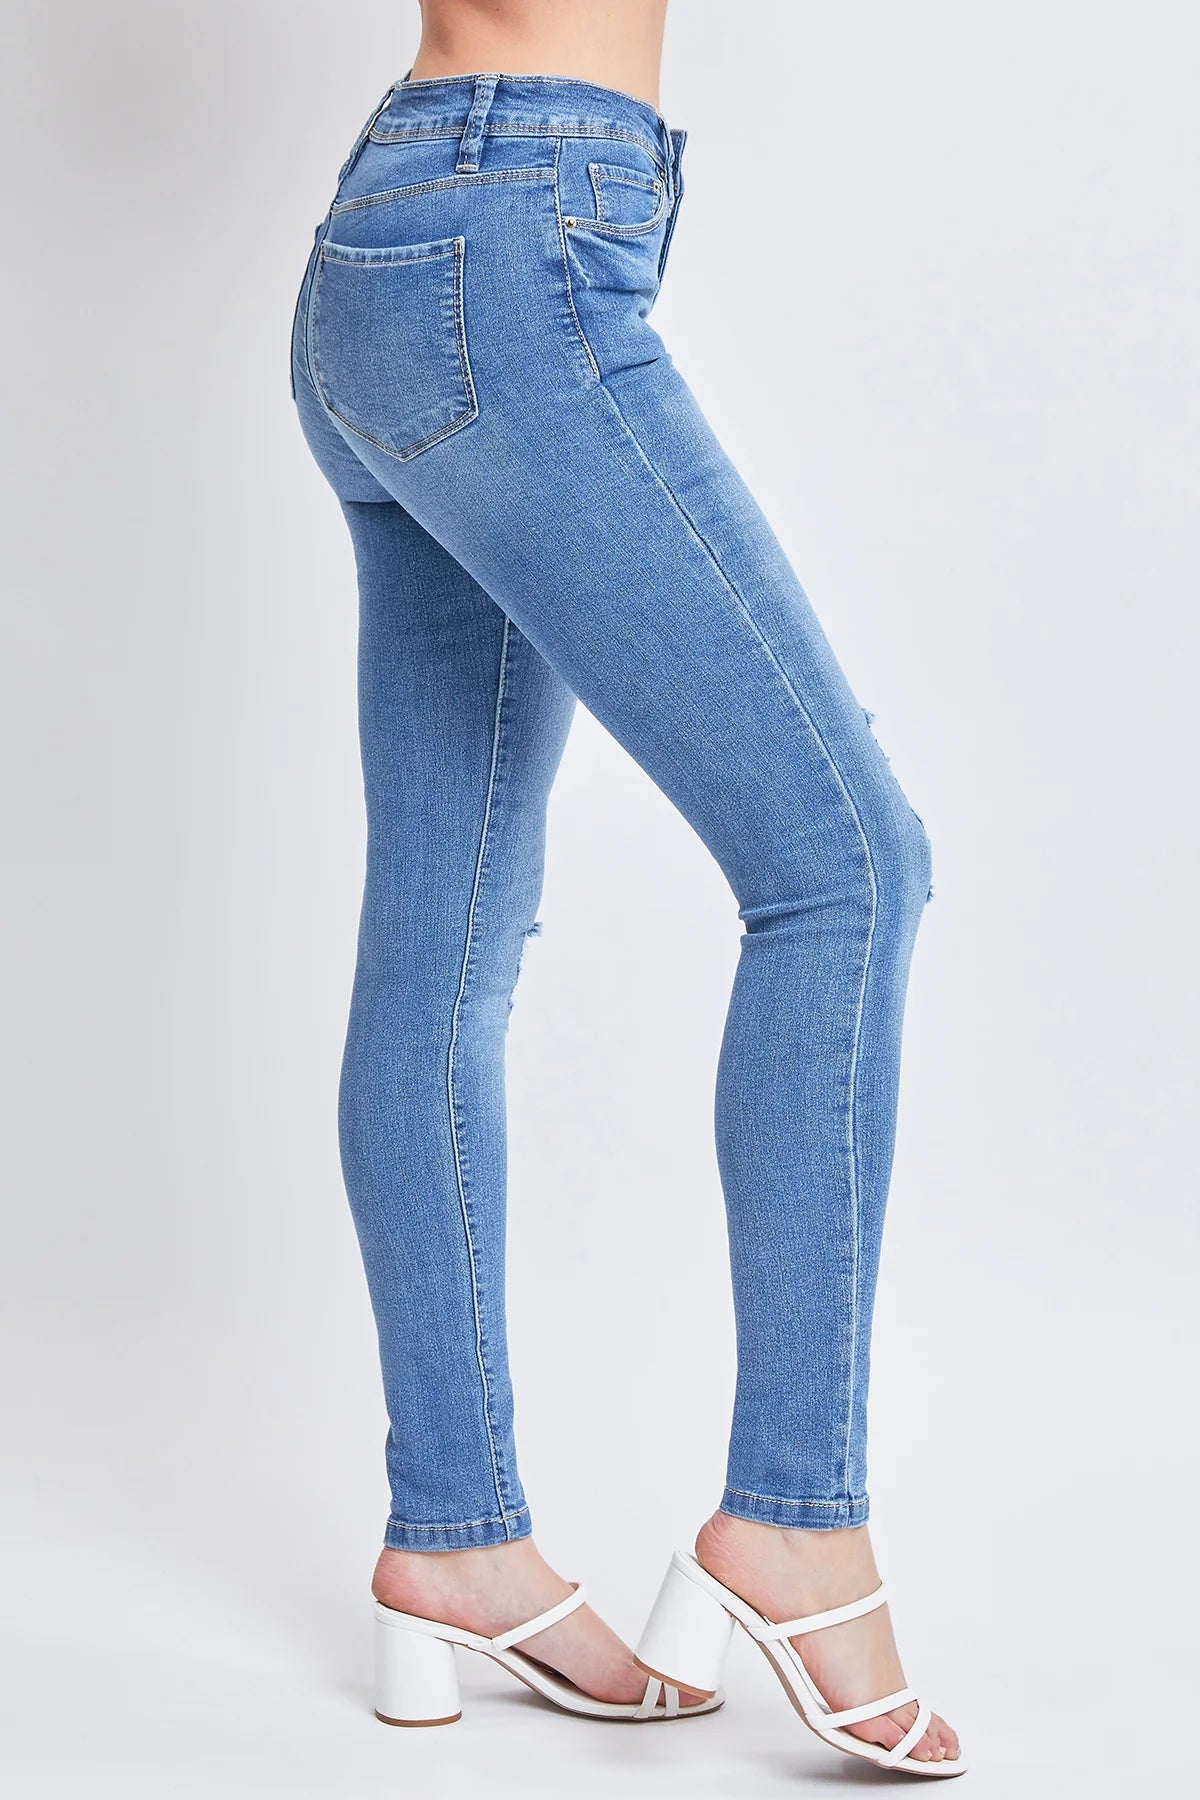 CLASSIC HIGH RISE SKINNY JEANS